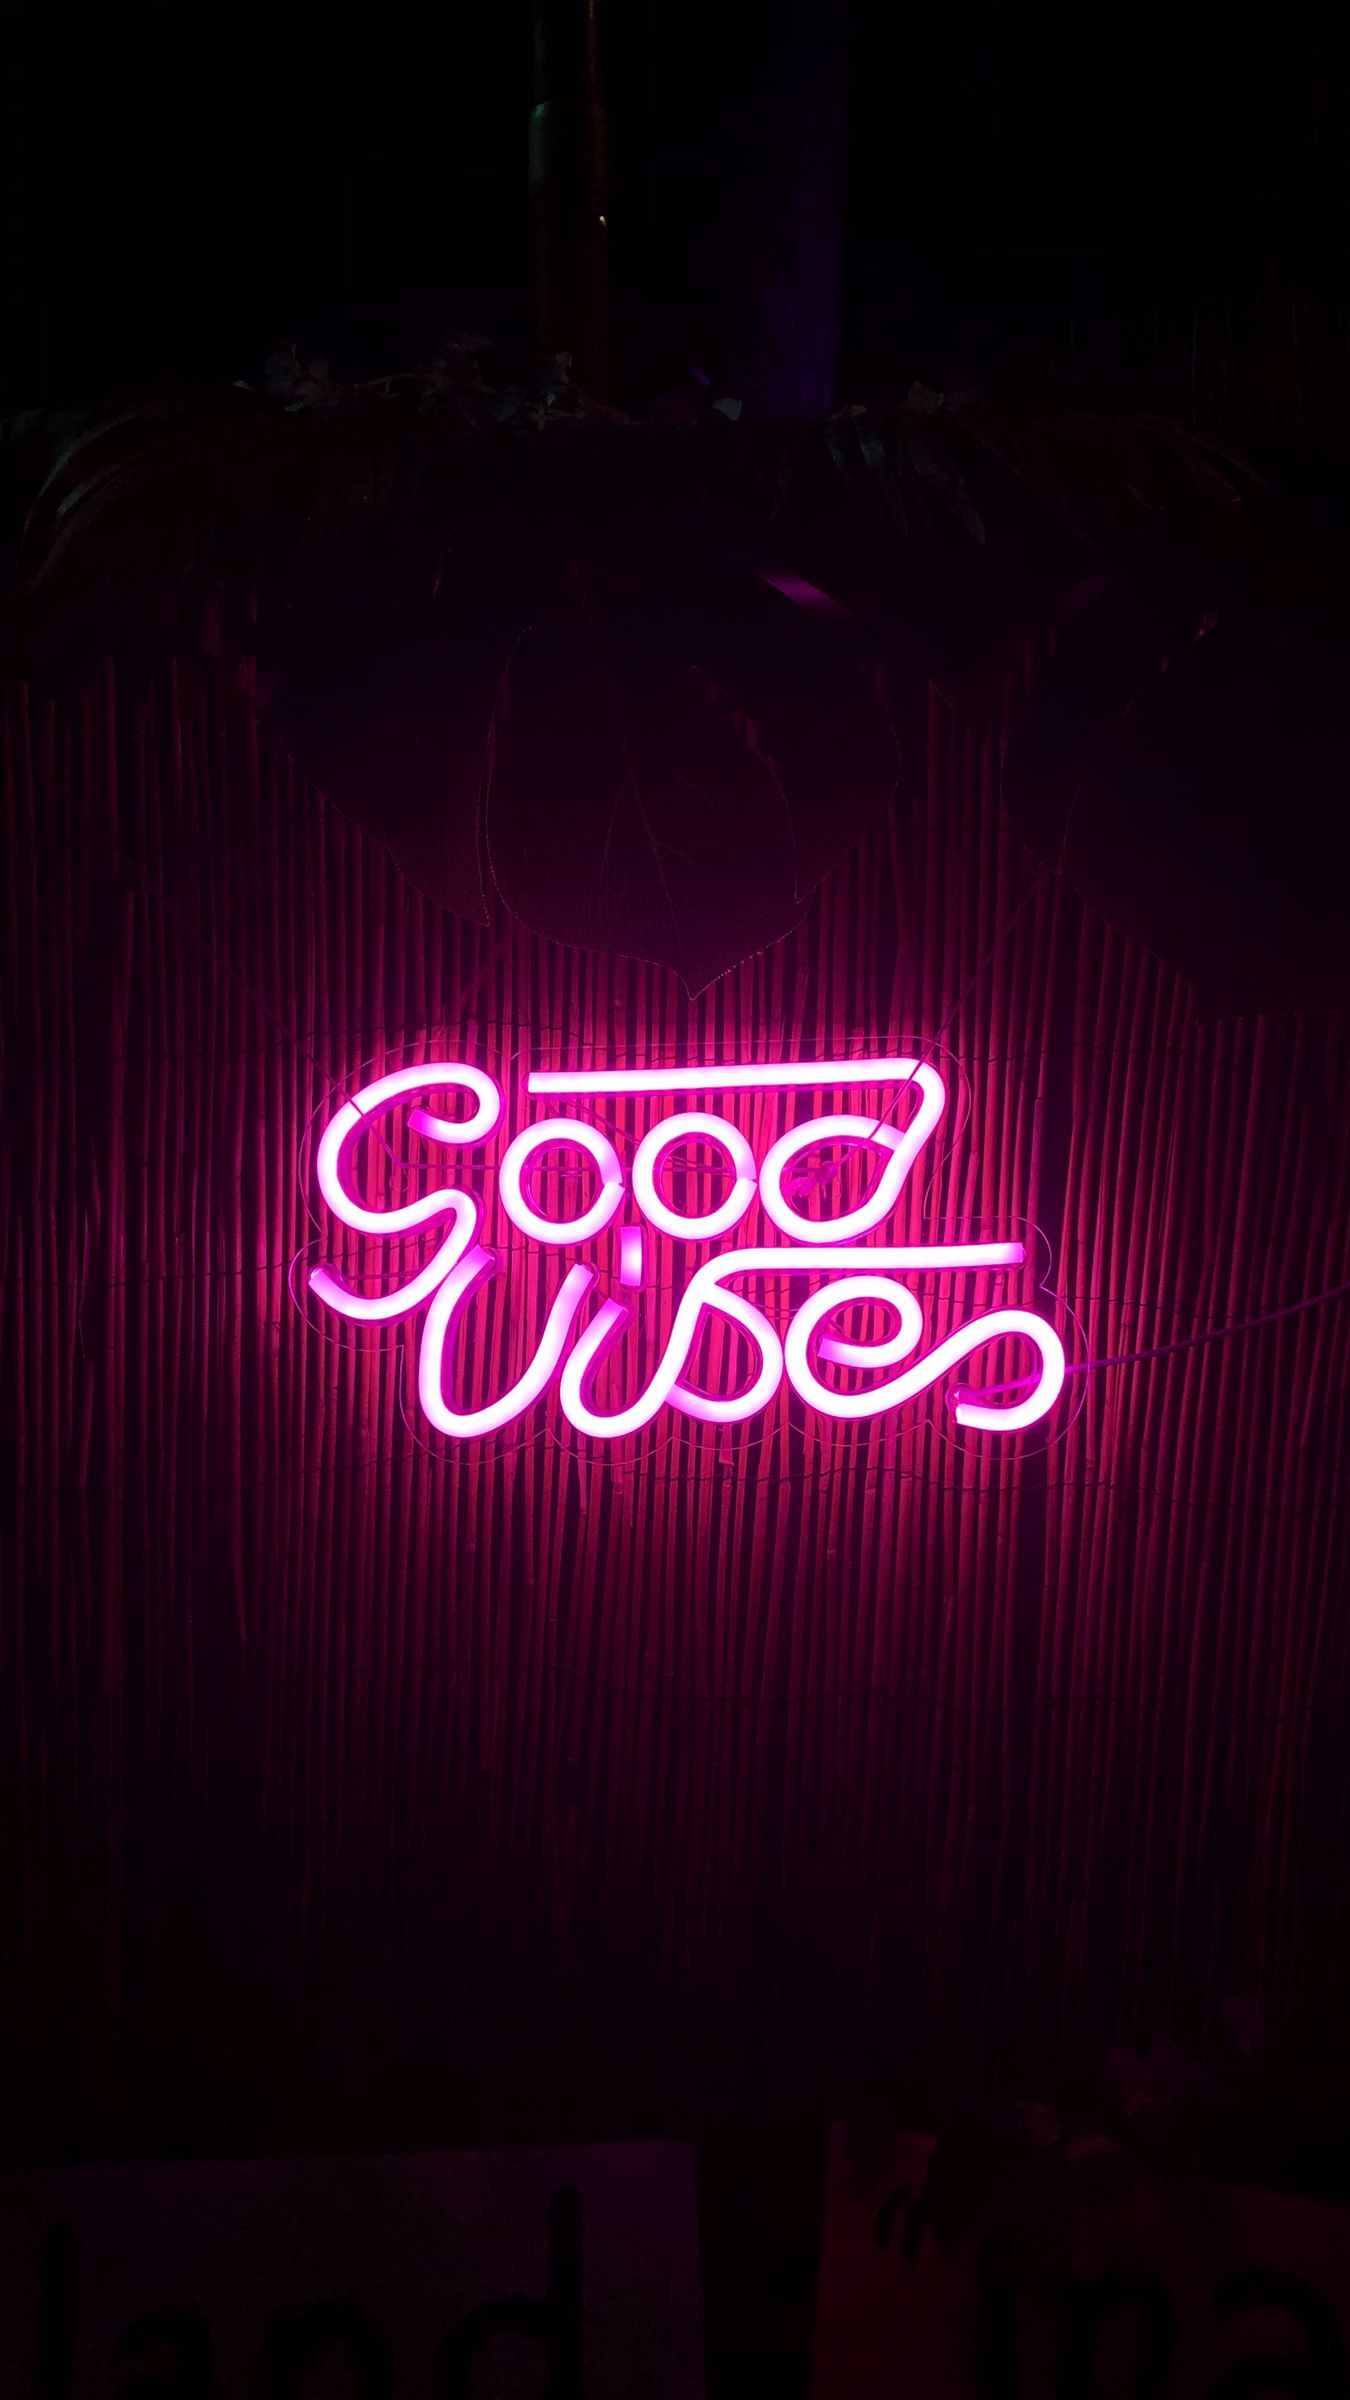 Download wallpaper 1350x2400 vibe, positive, words, neon, light, pink  iphone 8+/7+/6s+/6+ for parallax hd background